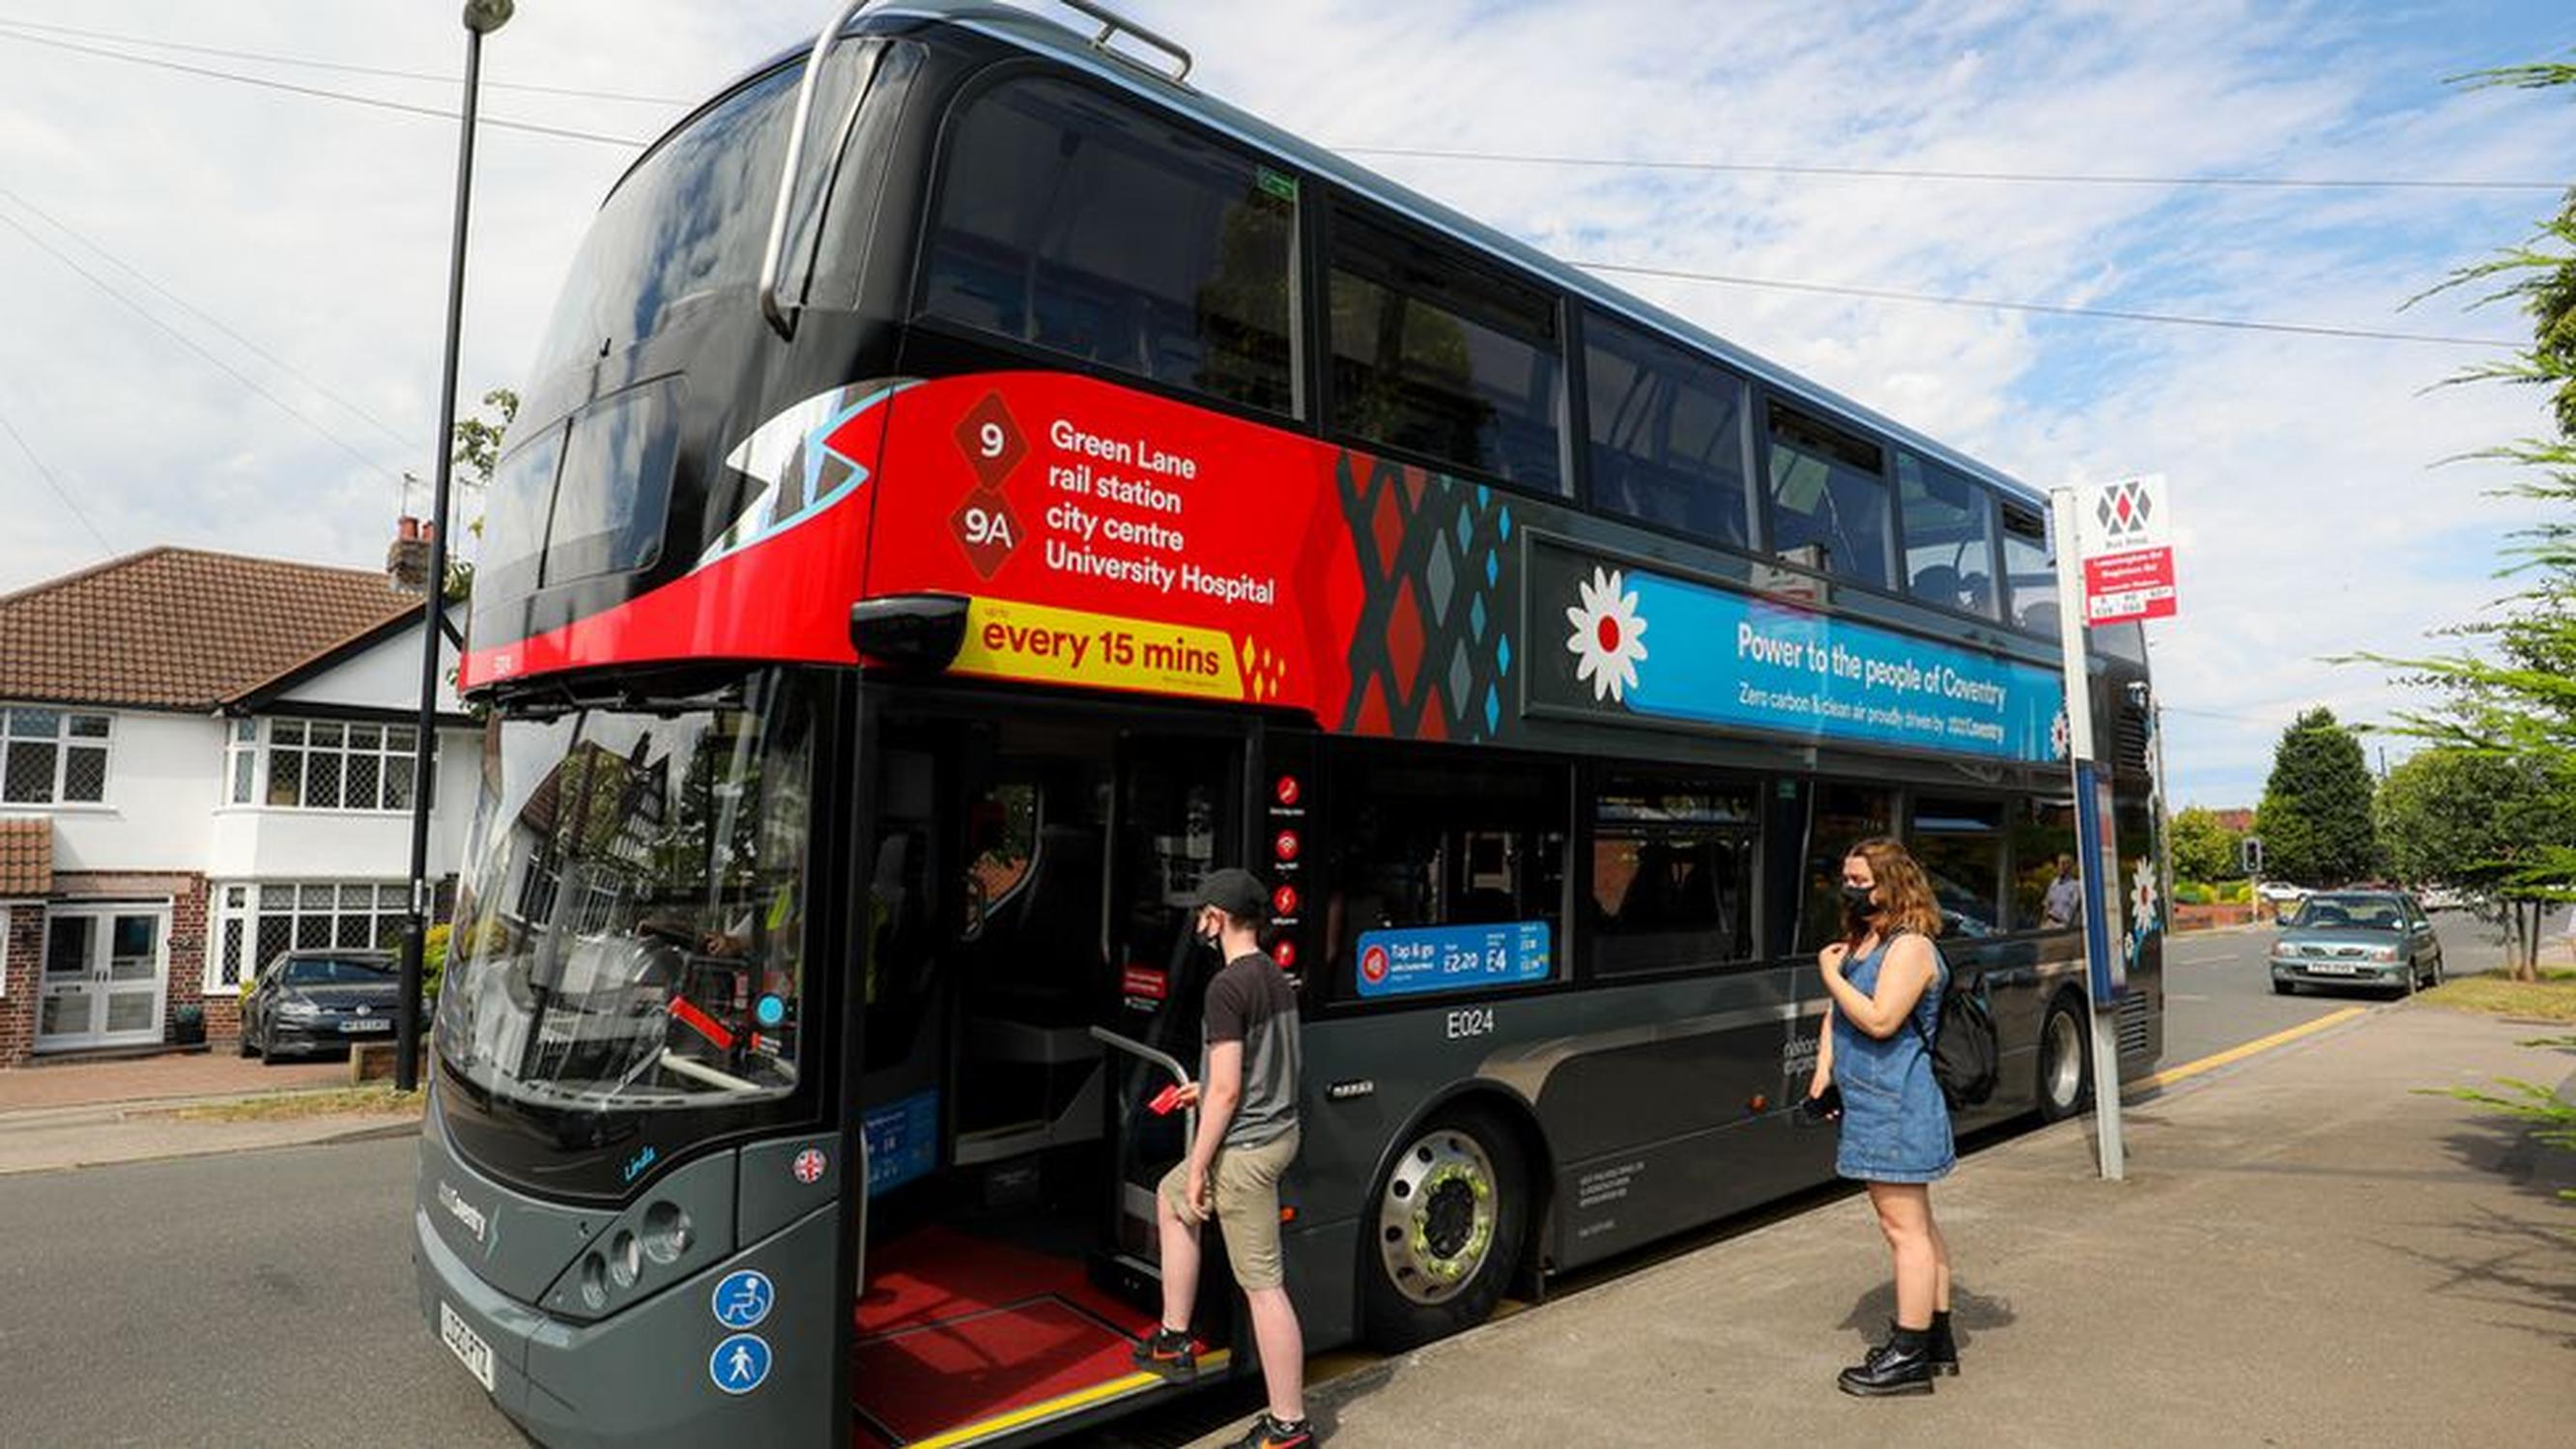 National Express to run 130 electric double deckers in Coventry